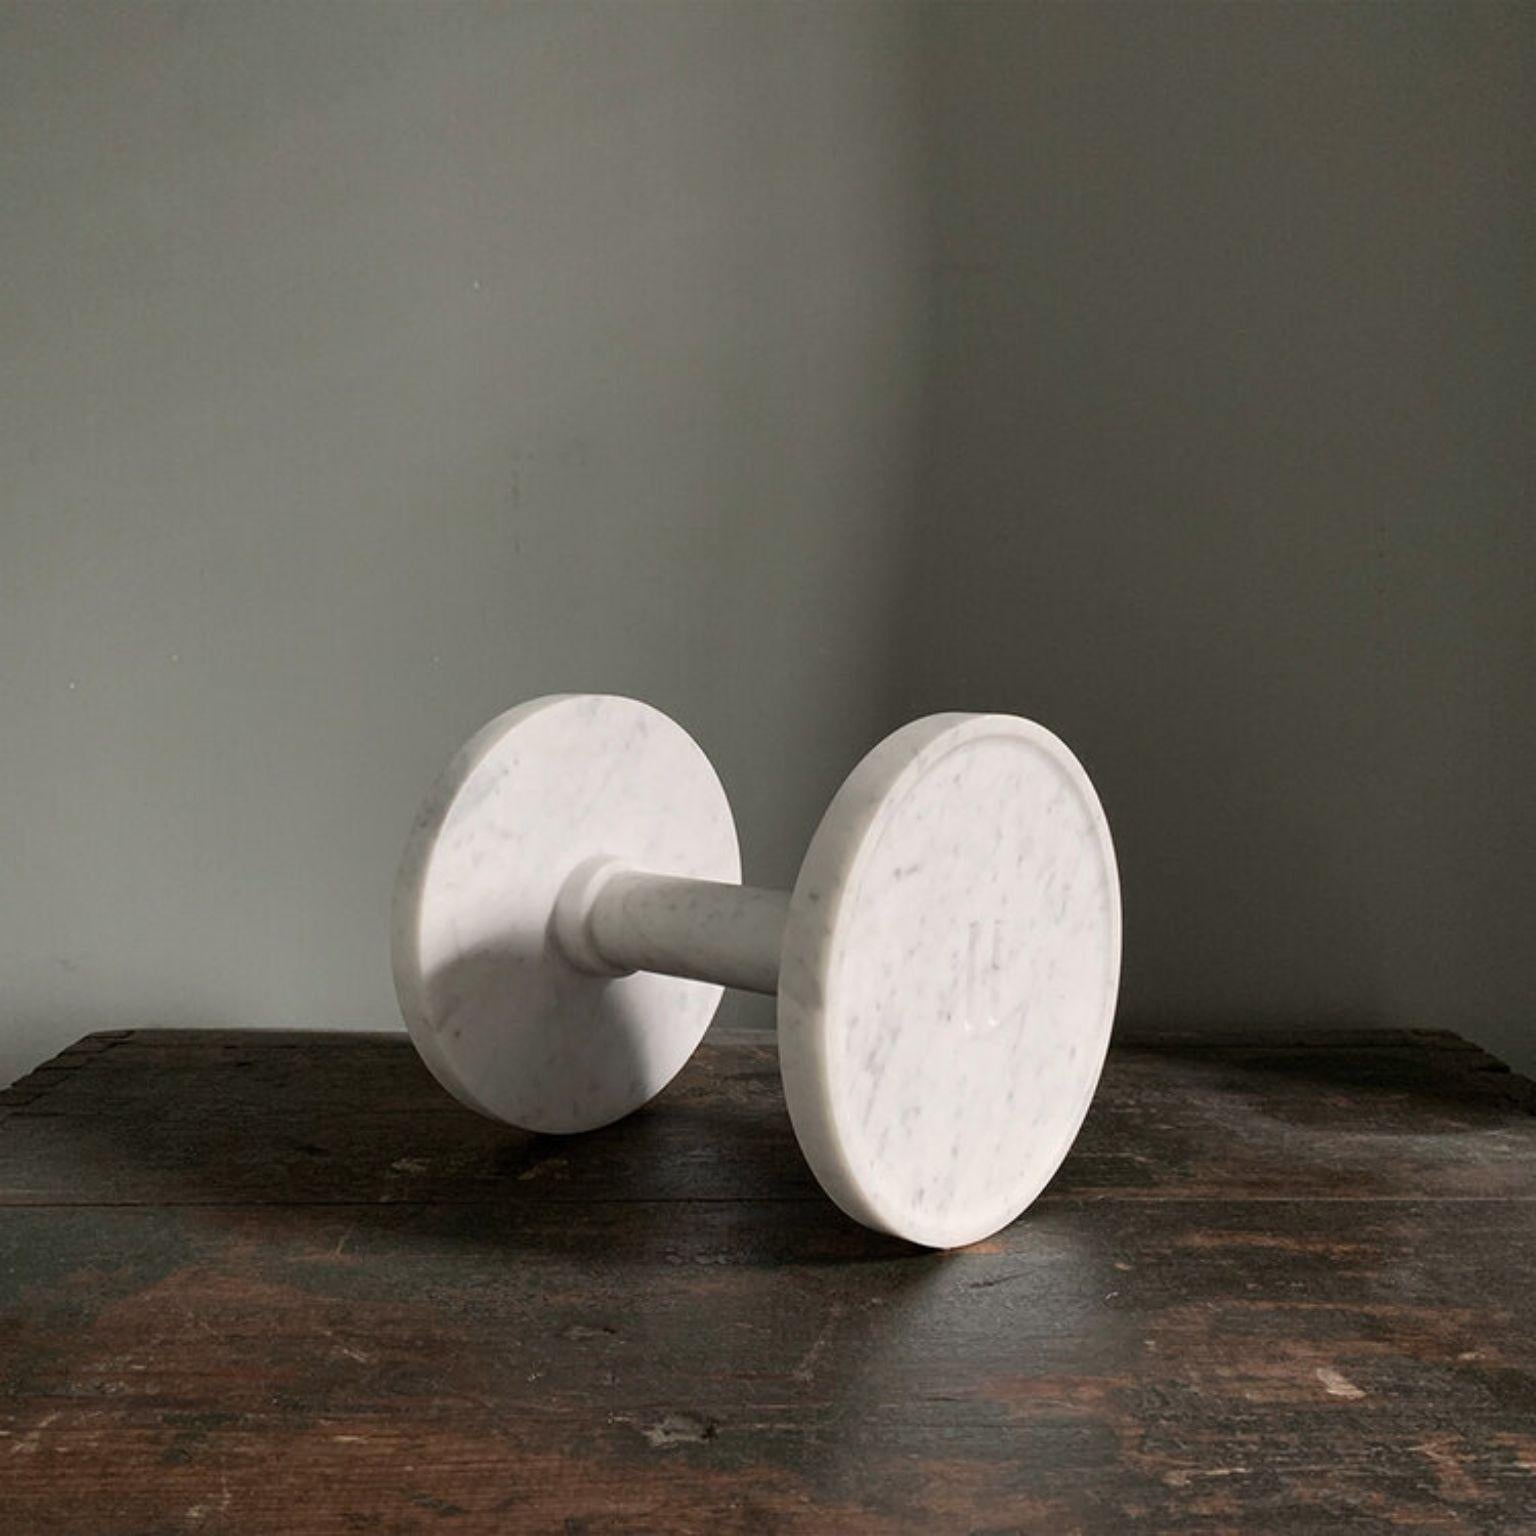 2 Kg dumbbell by Pete Pongsak
2017
Materials: Carrara Marble
Dimensions: diameter 16 x height 18.5 cm
Made in Italy

Hand craved from a single piece of stone.

ARCHIVE & ARCHIVE Studio specializes in creating functional sculptures and